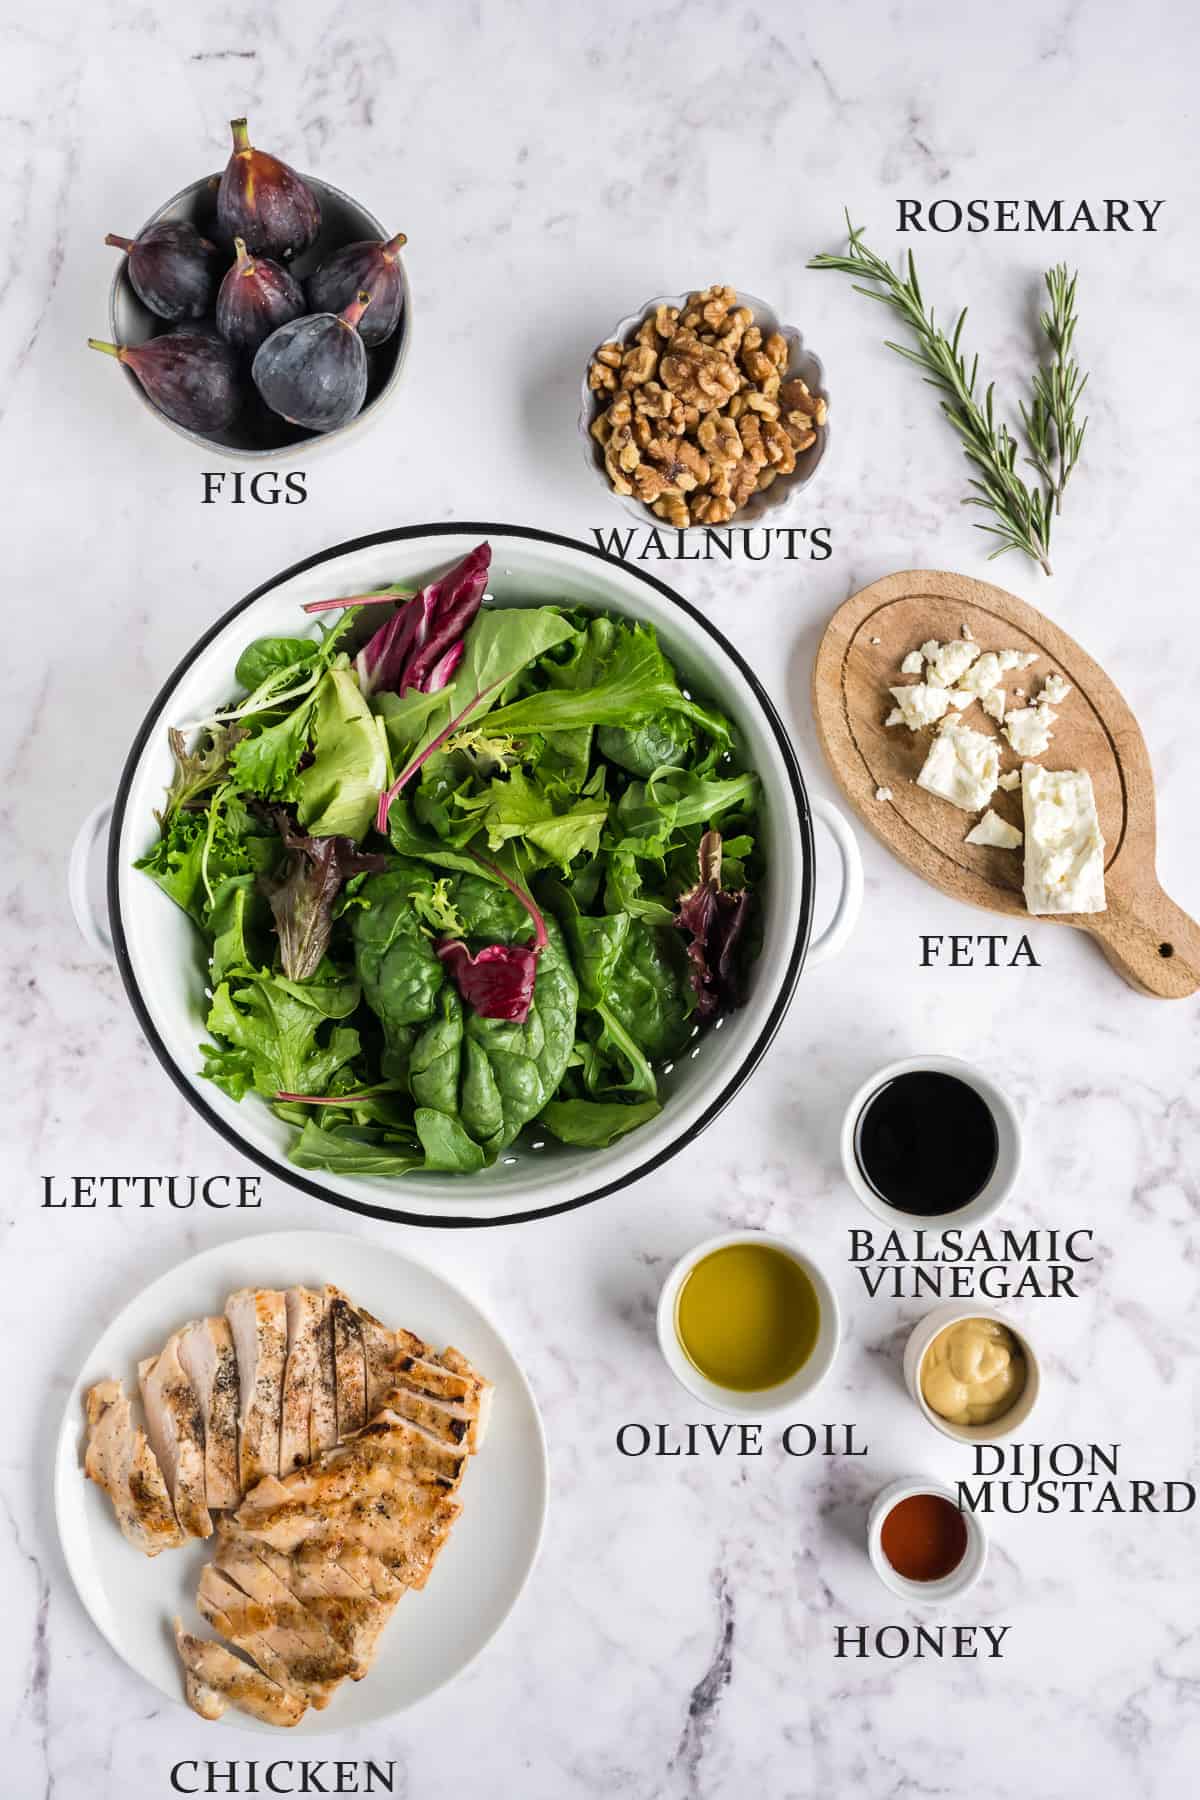 Ingredients needed to make a fig salad laid out on a light background with text overlay.